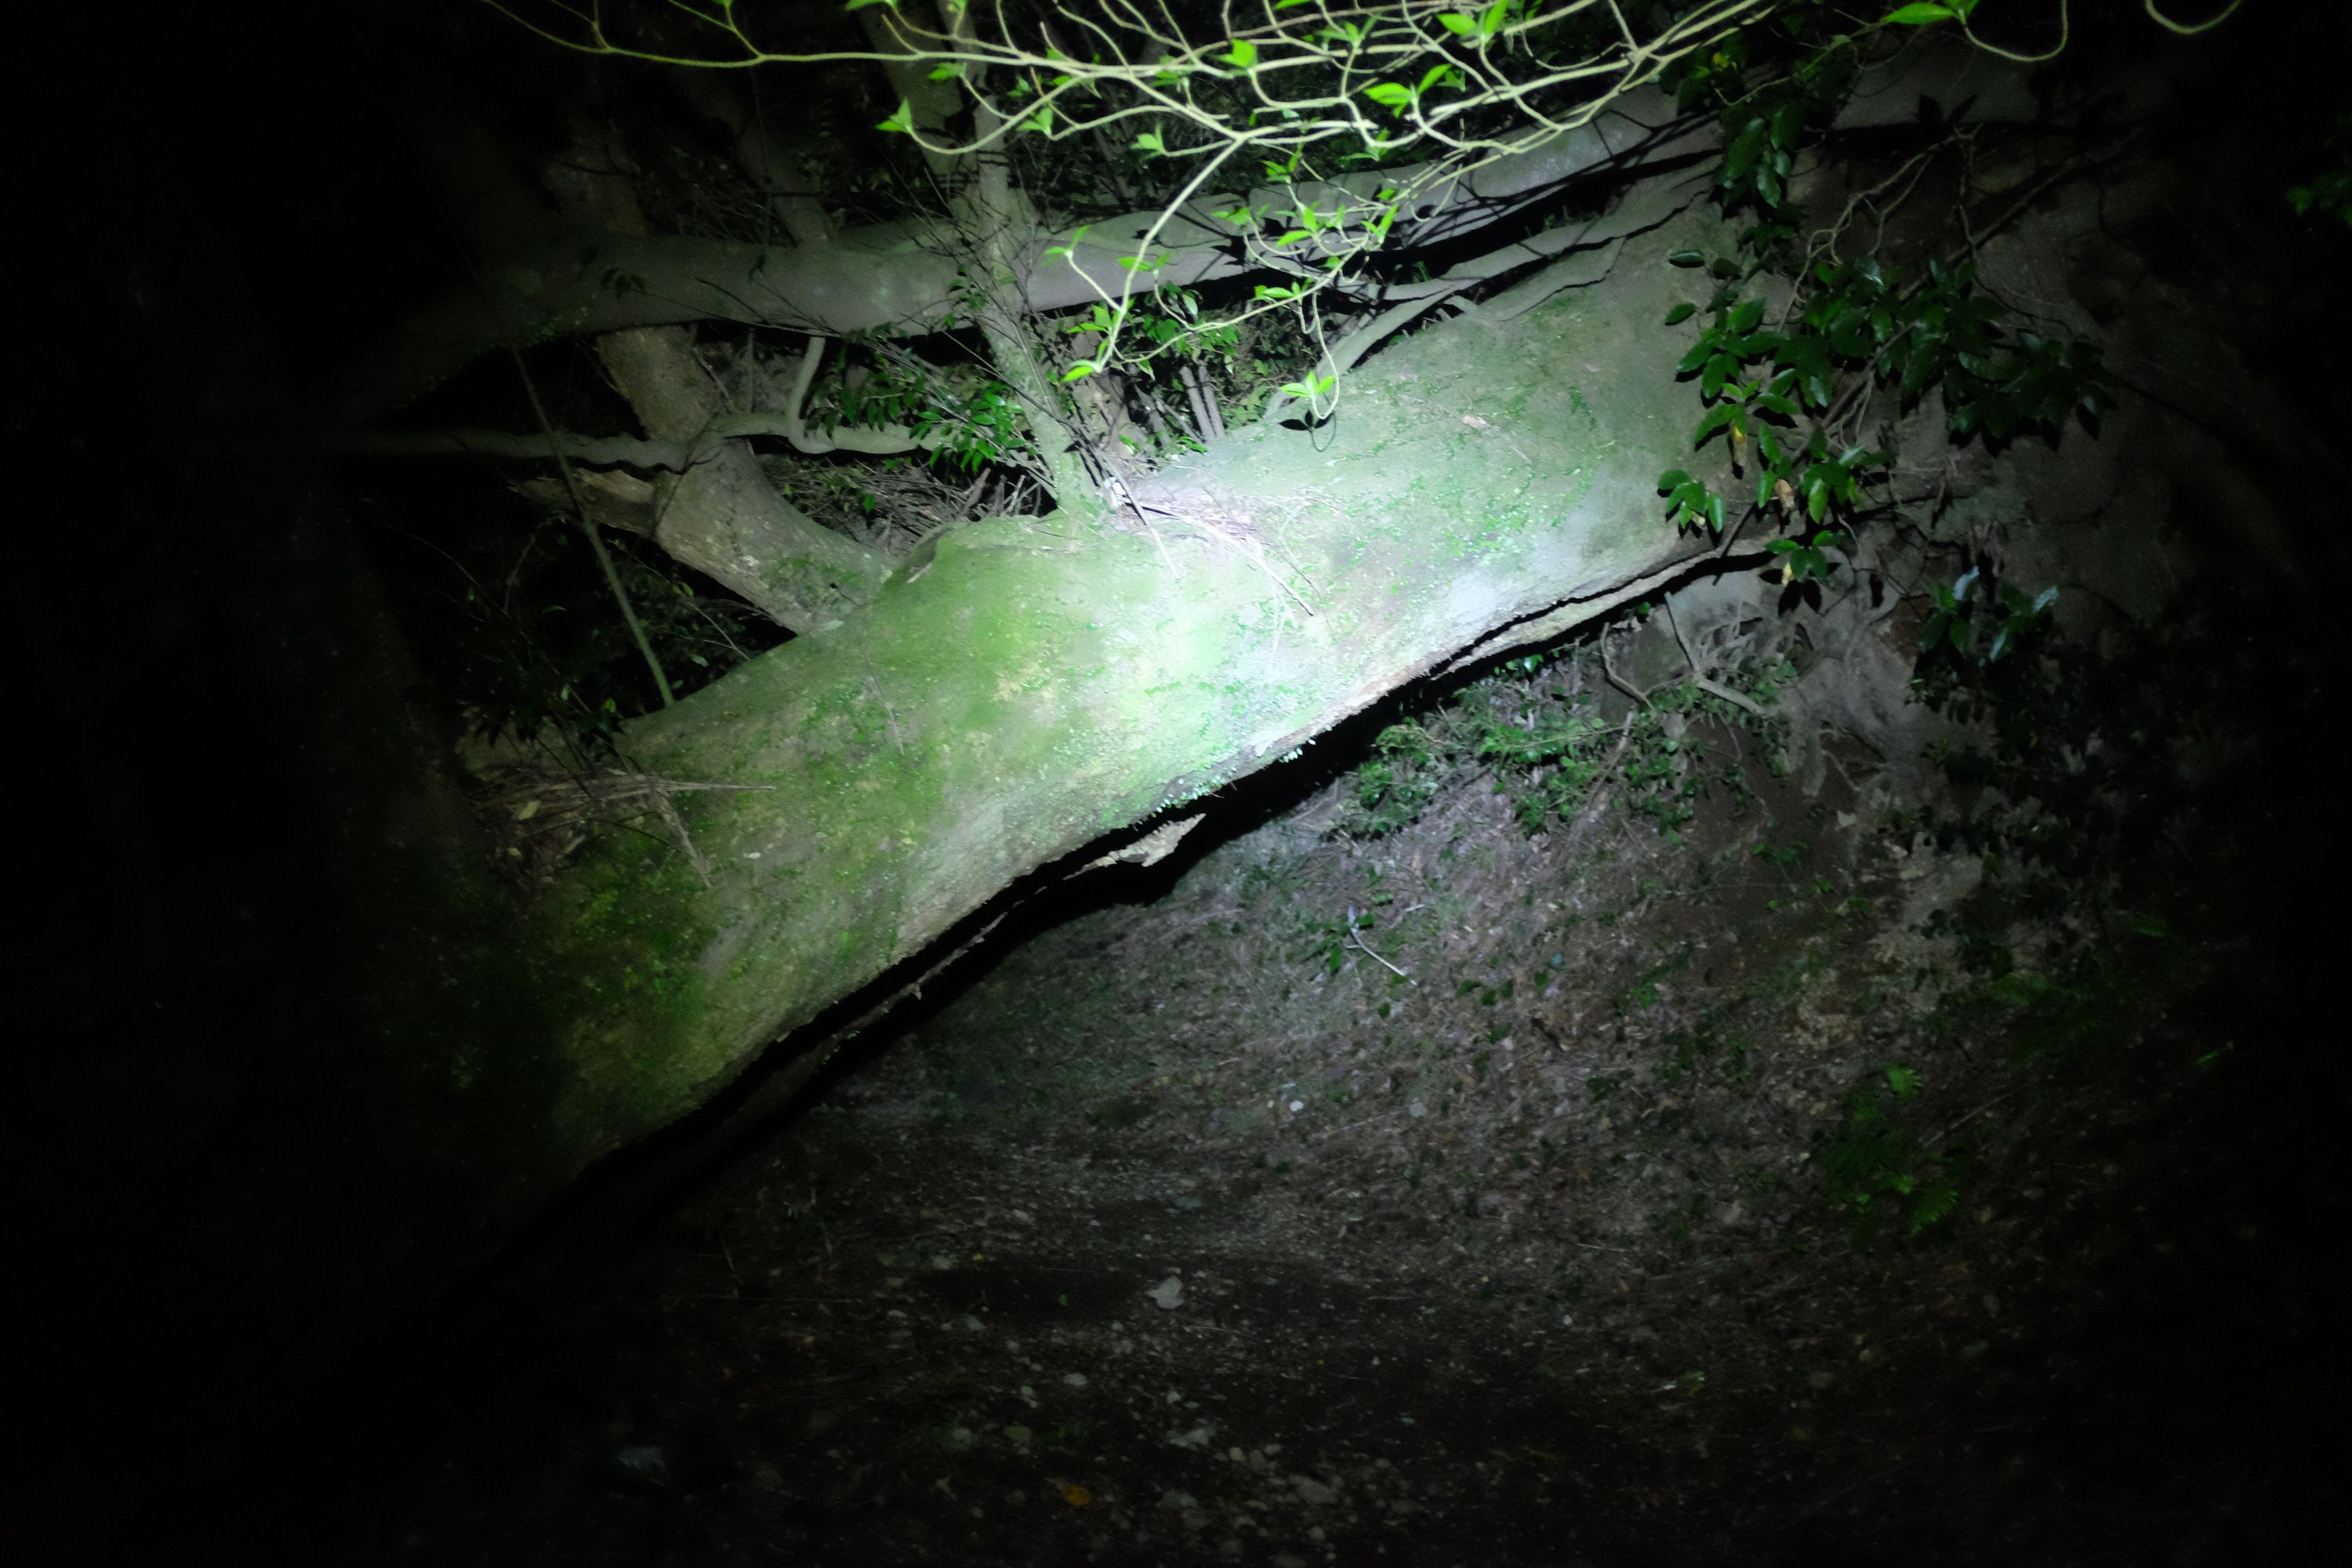 The trunk of a large fallen tree lit by a torch at night.